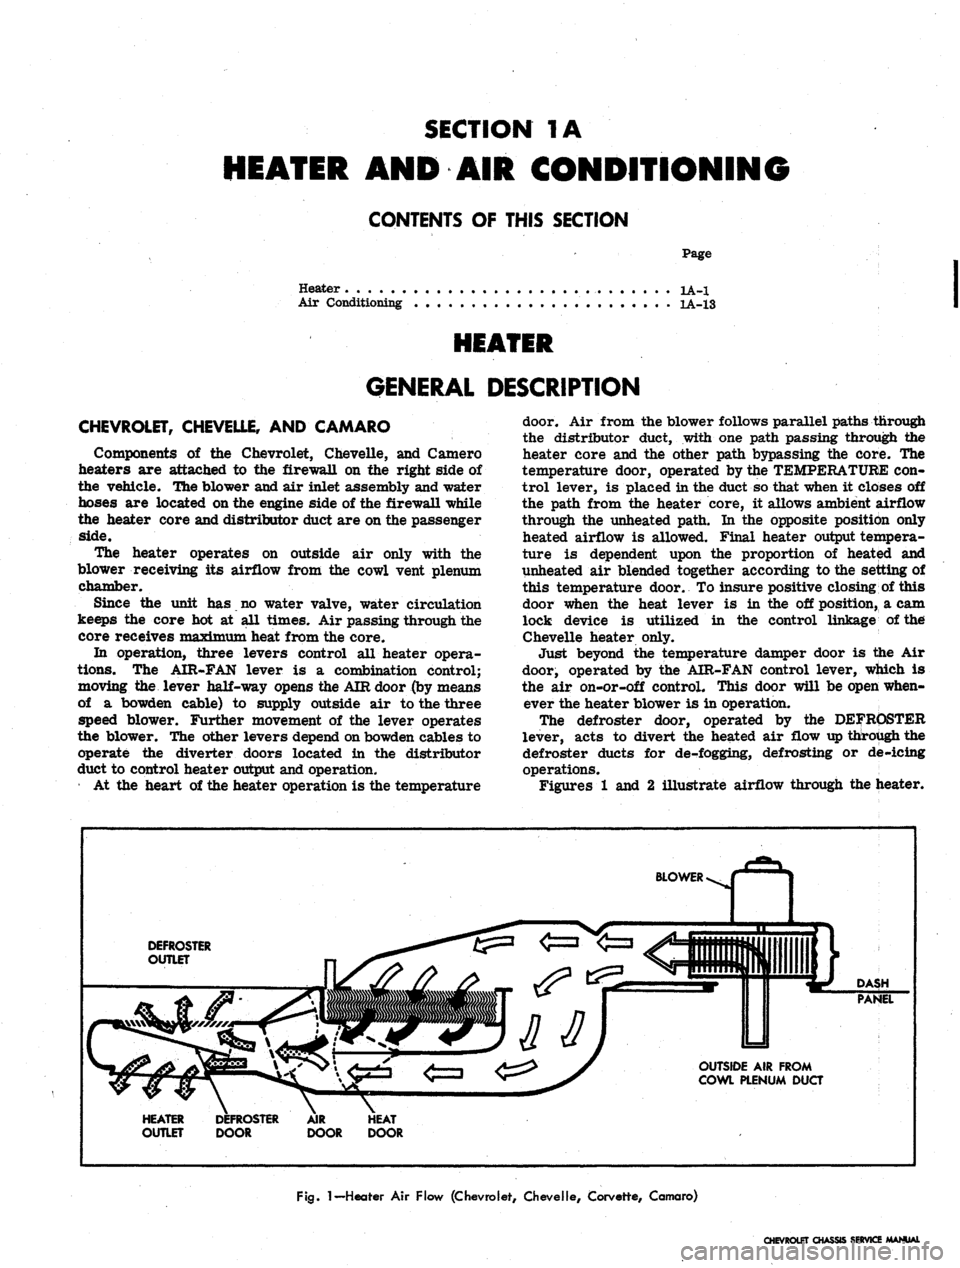 CHEVROLET CAMARO 1967 1.G Chassis Workshop Manual 
SECTION
 1A

HEATER
 AND AIR
 CONDITIONING

CONTENTS
 OF
 THIS SECTION

Heater

Air Conditioning 
Page

1A-1

1A-13

HEATER

GENERAL DESCRIPTION

CHEVROLET, CHEVELLE,
 AND
 CAMARO

Components
 of the